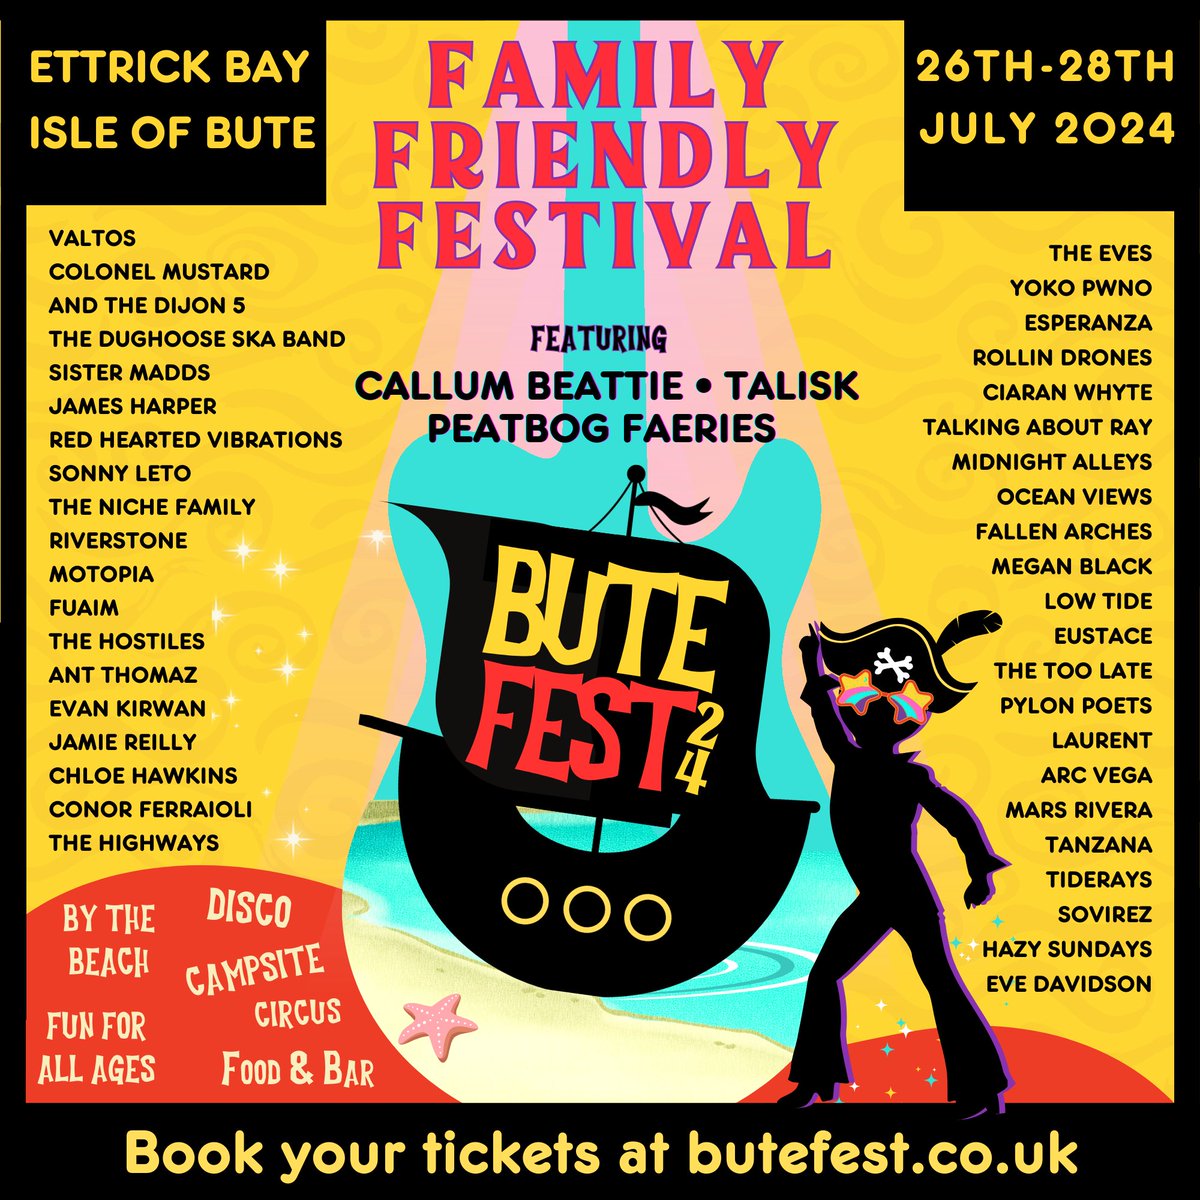 We are playing at @ButeFest on Fri 26 July